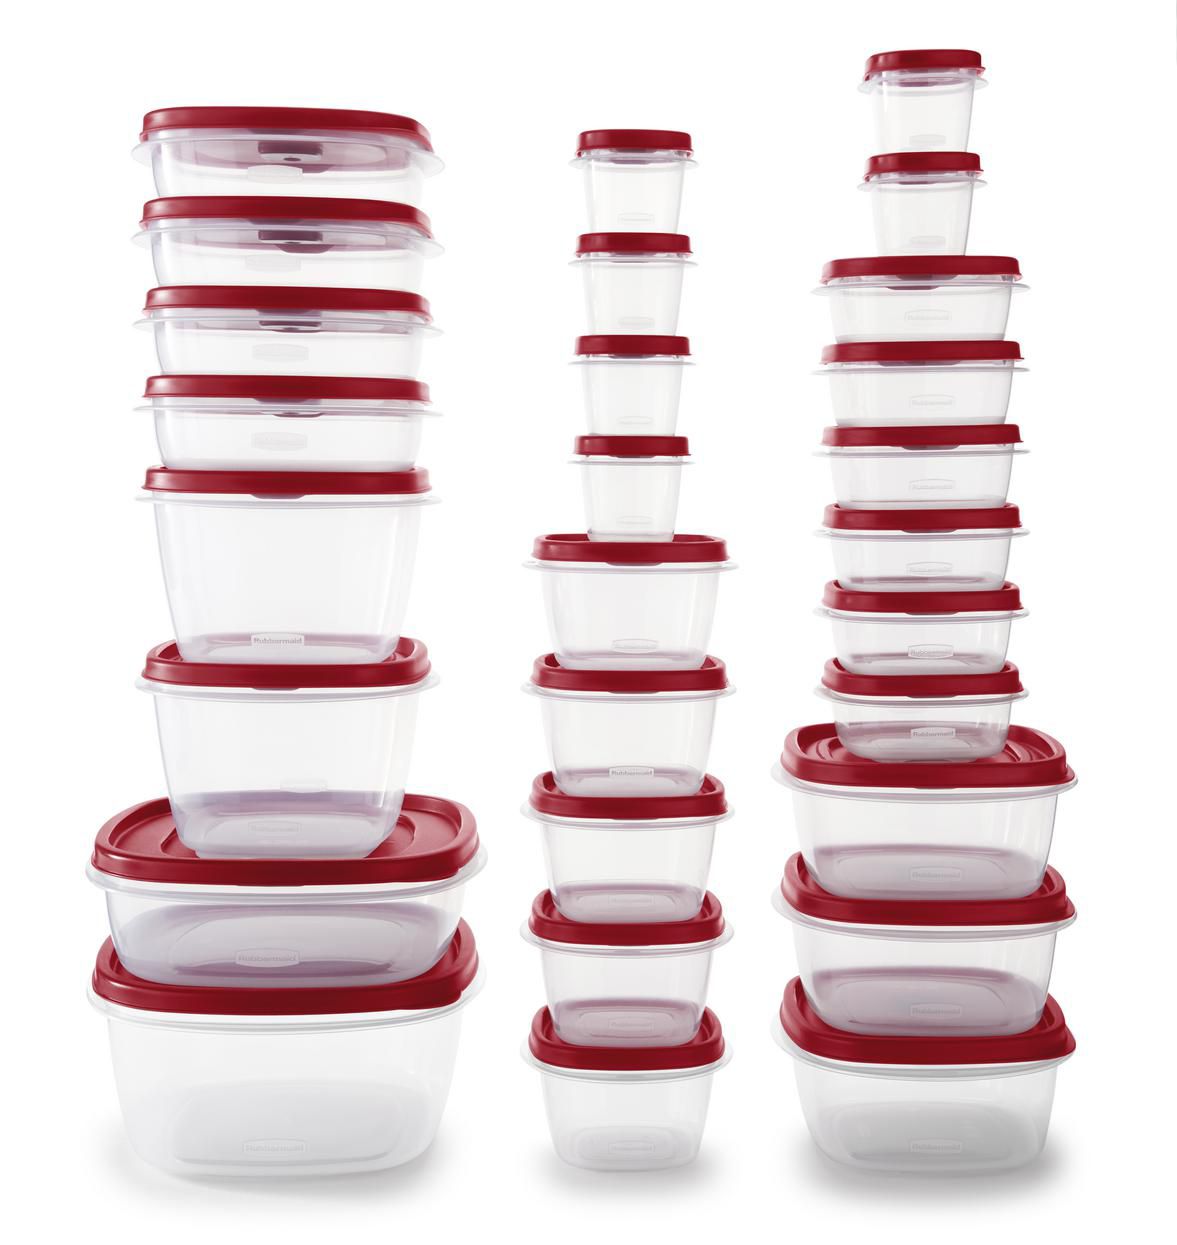 Rubbermaid 56 piece Food Storage Containers Set Easy Find Lids Clear  Plastic